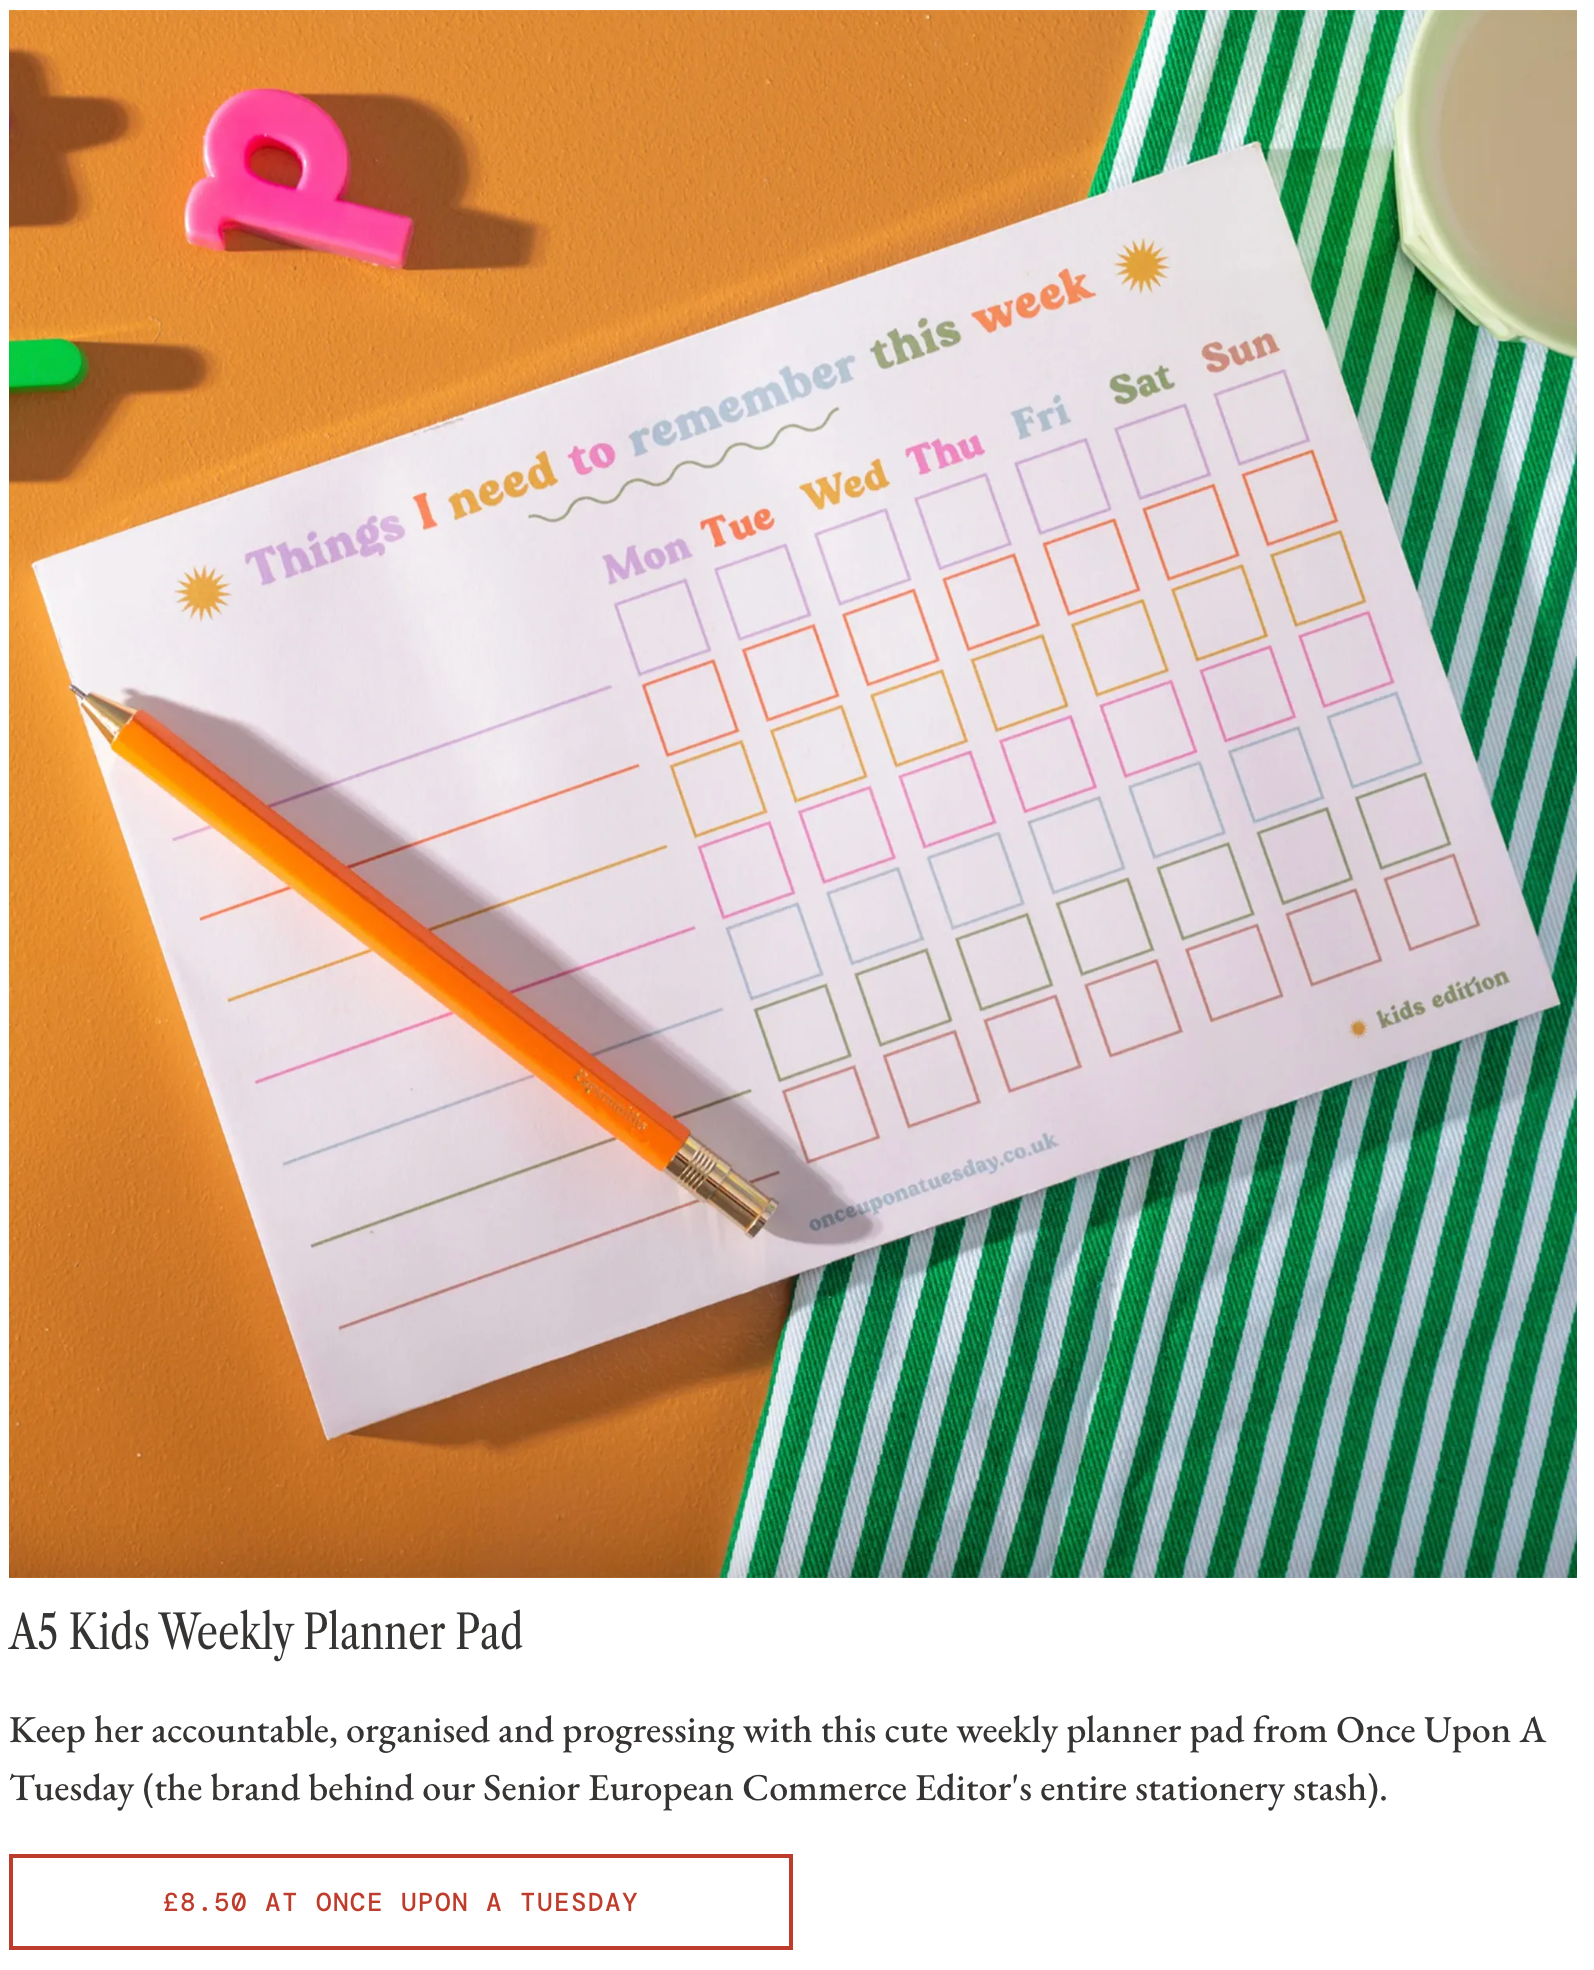 A5 Kids Weekly Planner Pad by Once Upon a Tuesday featured in Glamour Magazine